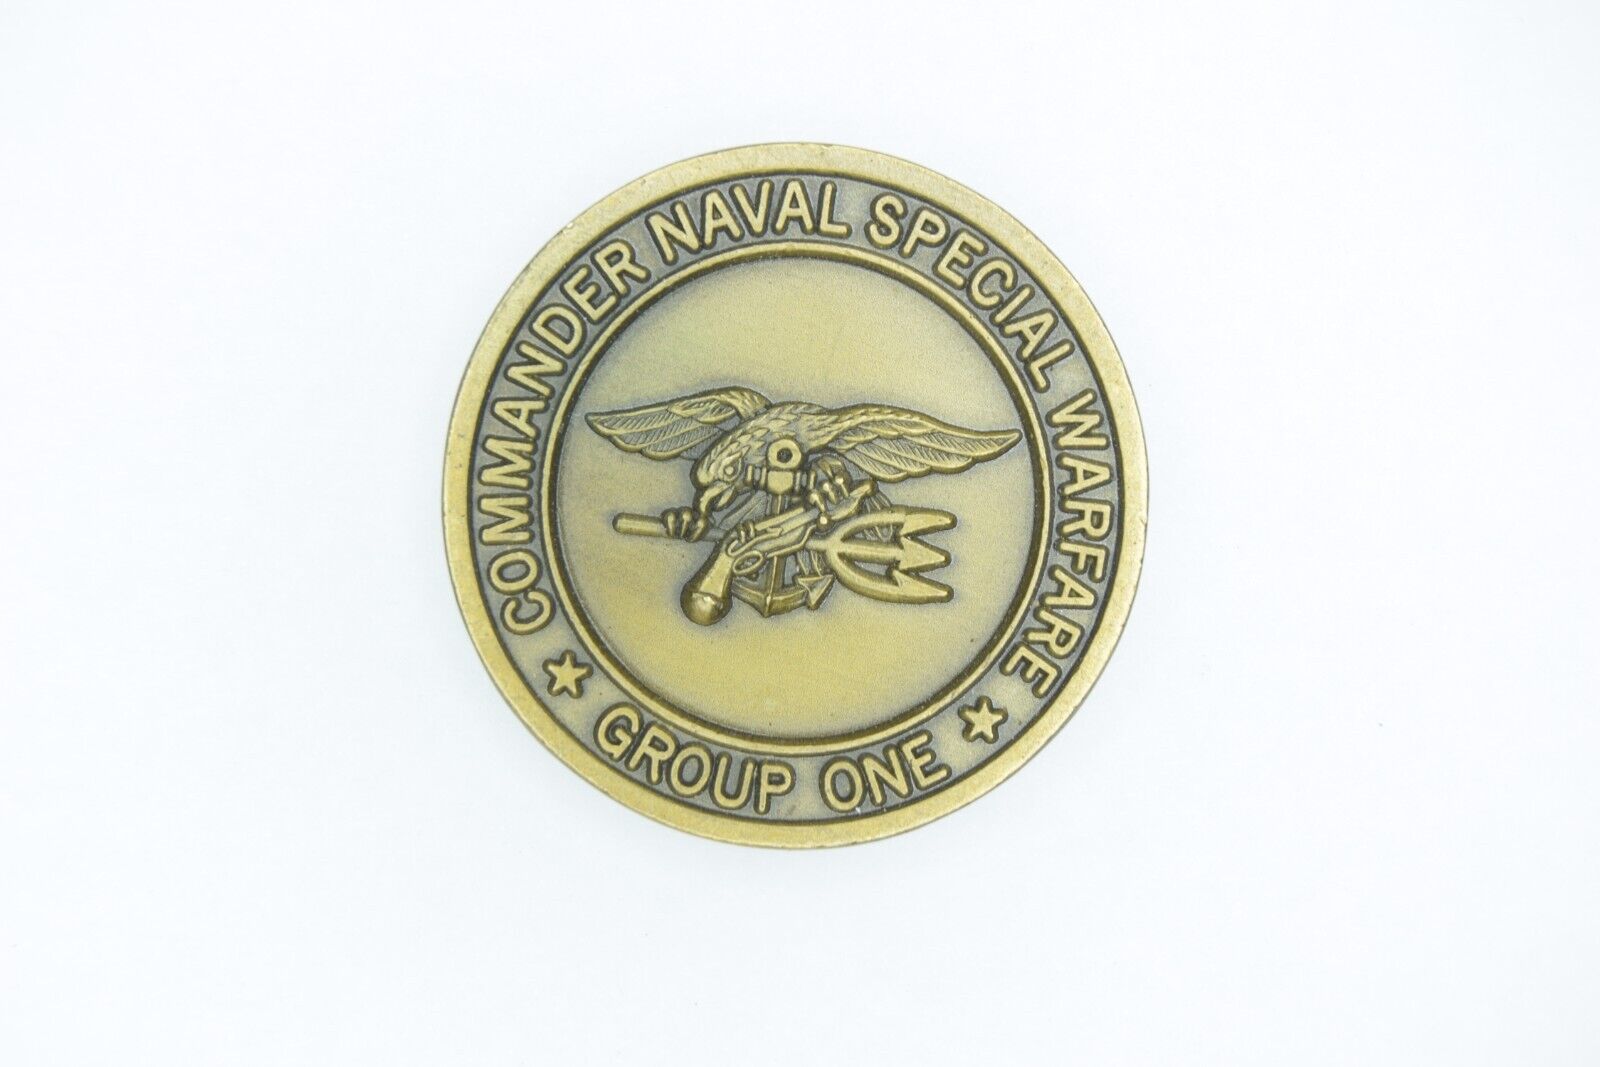 RARE Authentic OEF OIF U.S. Navy Naval Special Warfare Group One SEAL Support